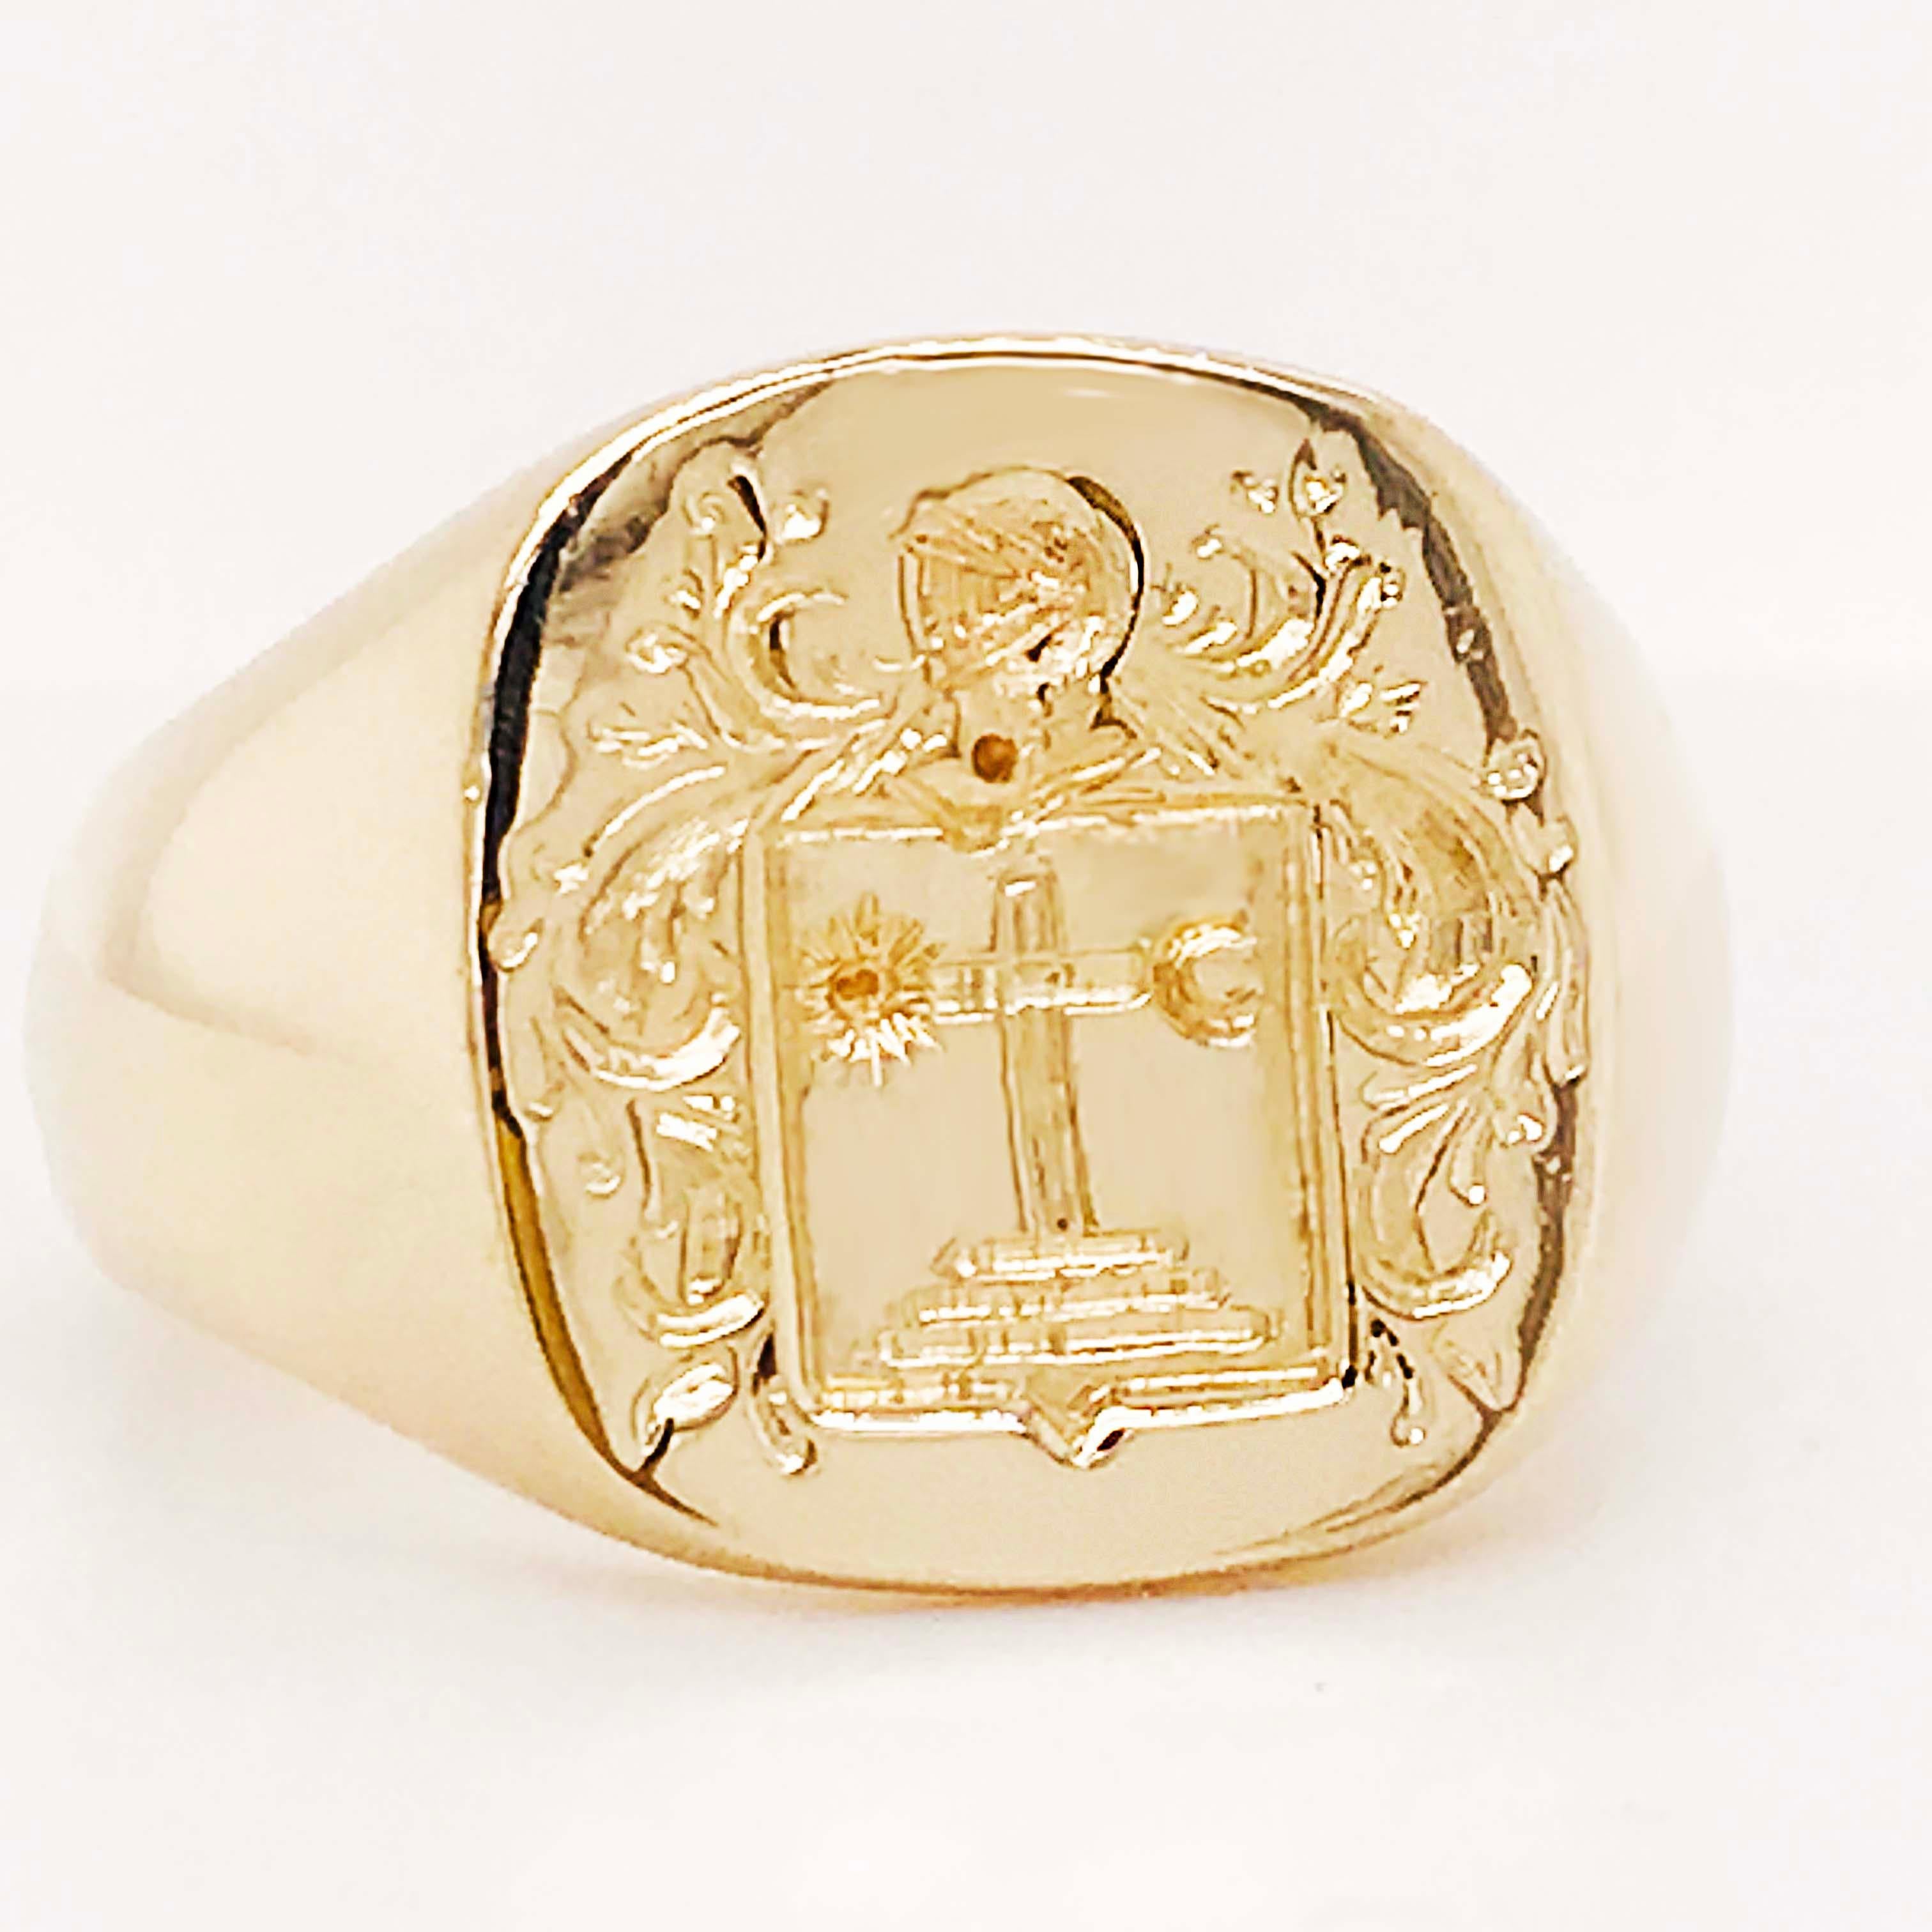 Religious Coat of Arms Signet Ring CIRCA 2000. This Men's signet ring is a religious fine jewelry piece with the Coat of Arms Crest on the top. This ring is CIRCA 2000 and is incredible condition, like new! The design was handmade and very detailed!